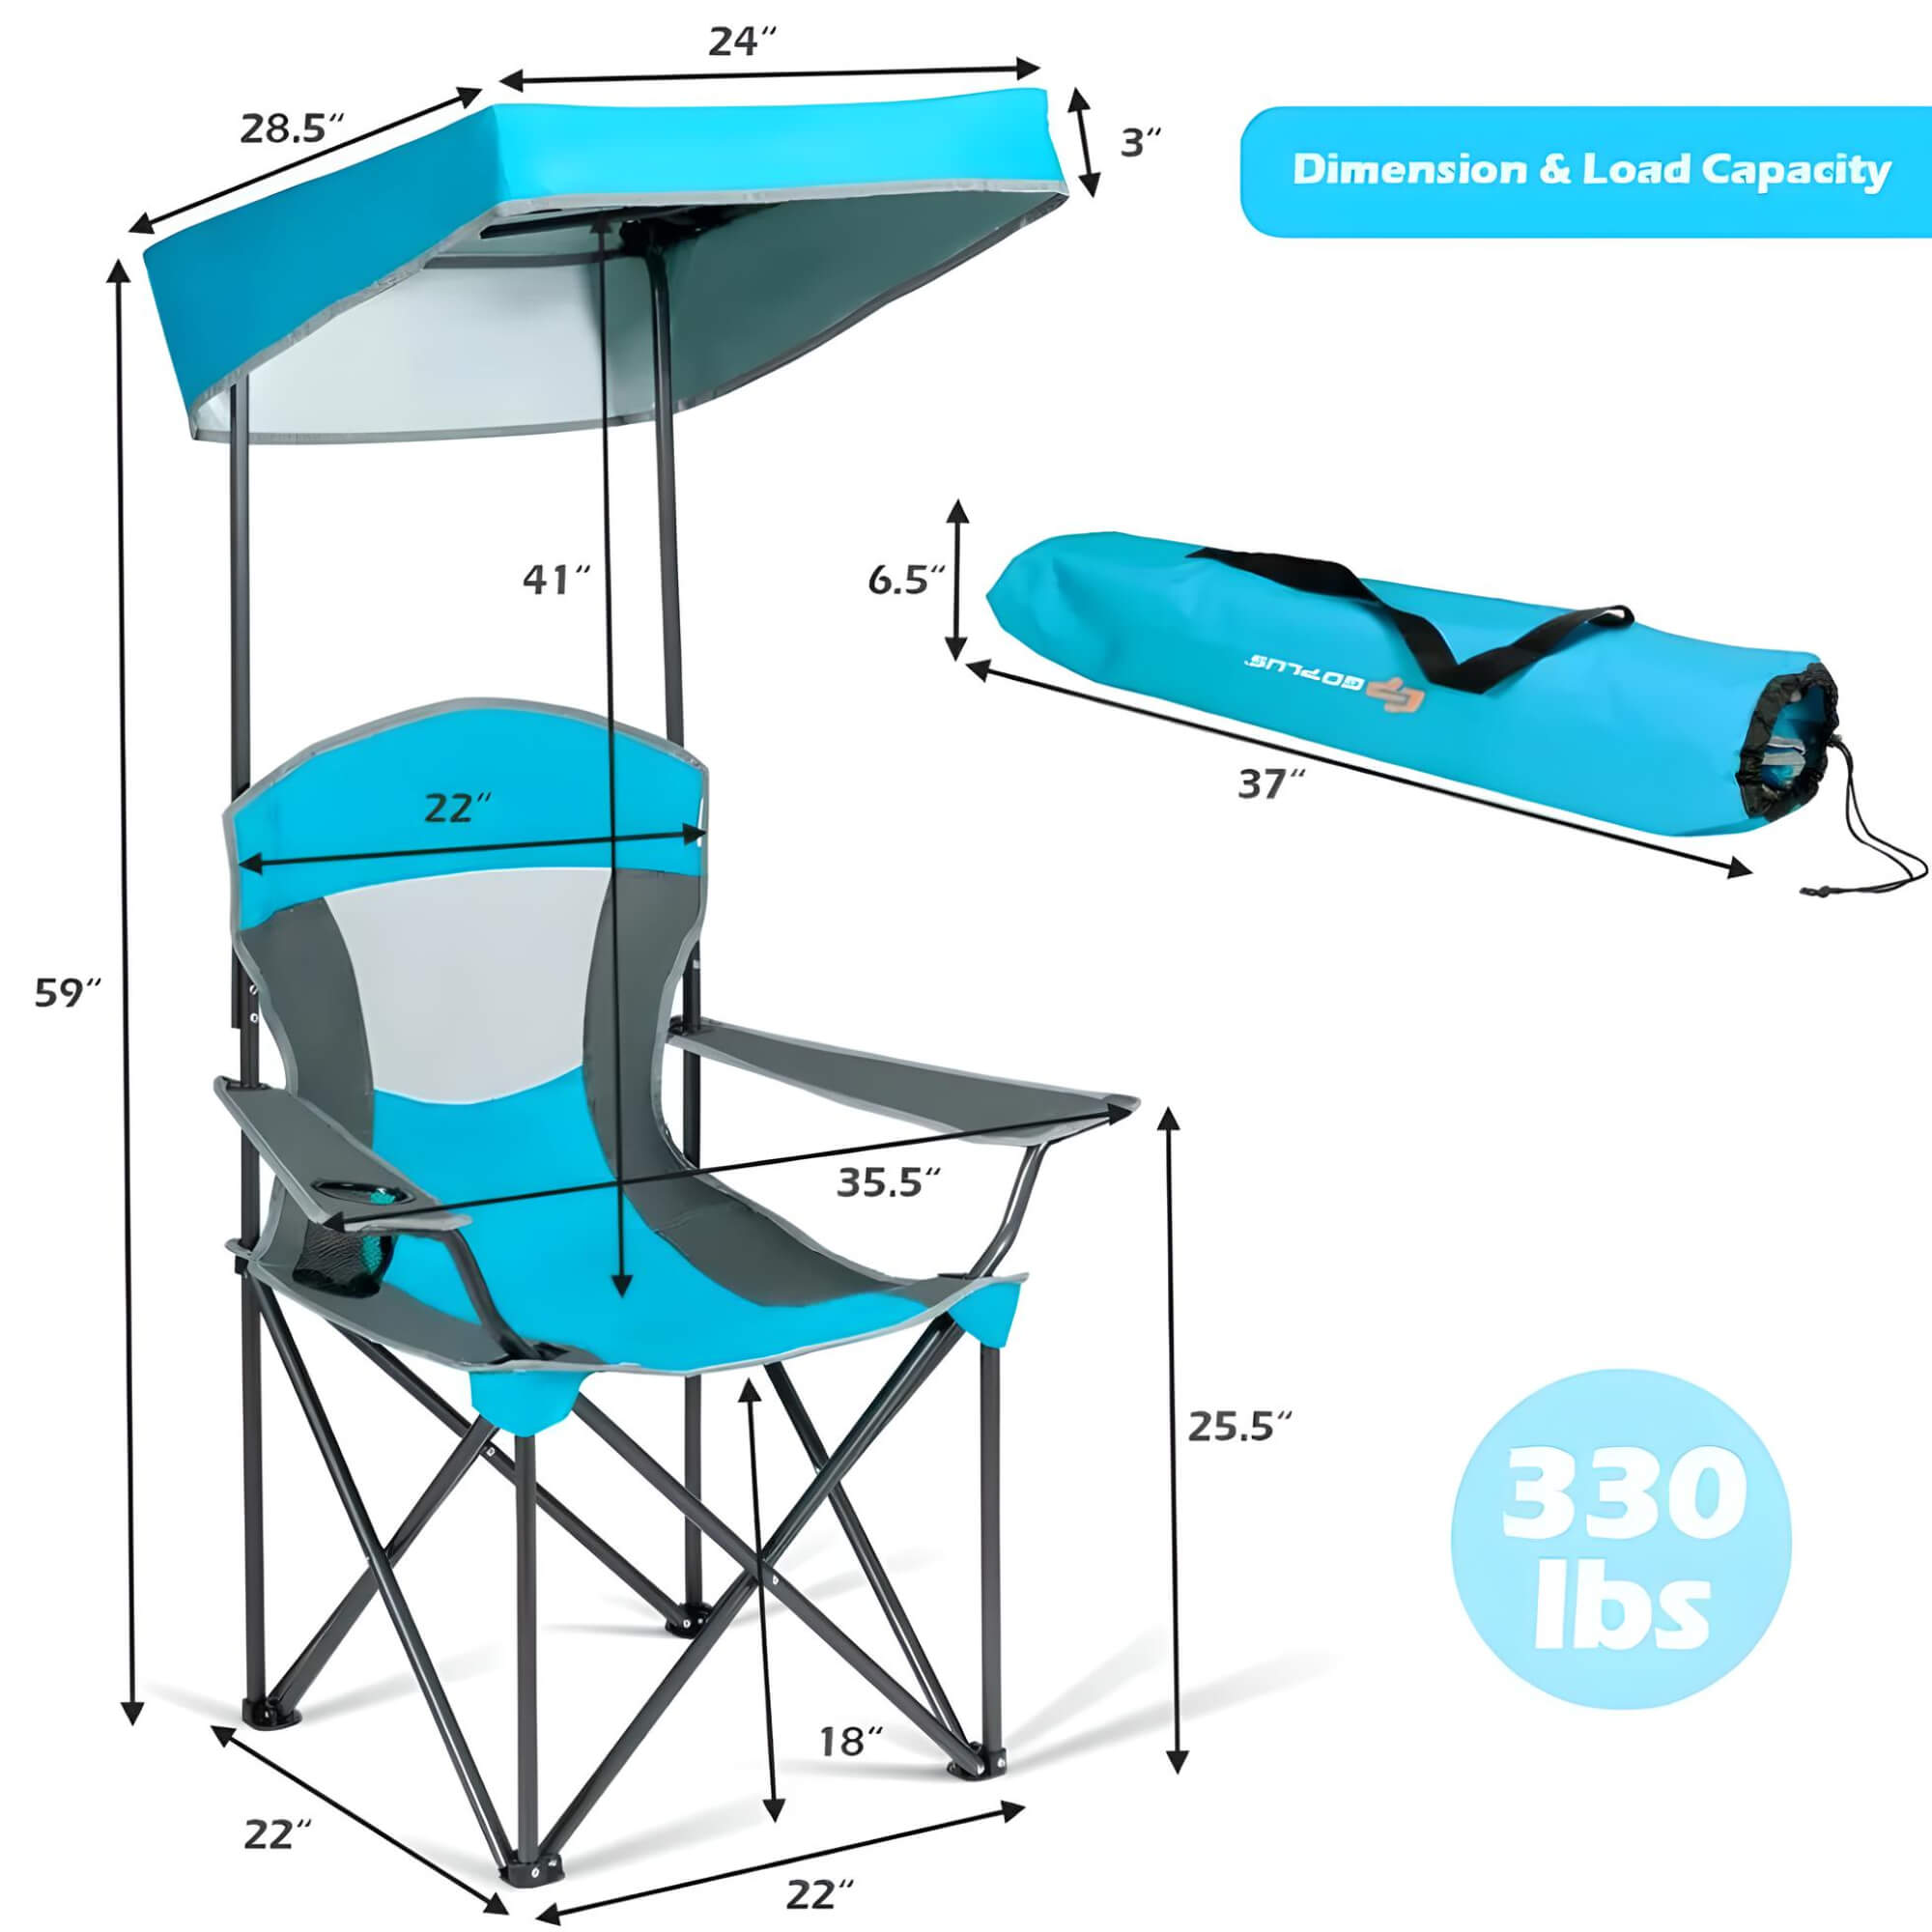 folding-chair-with-sunshade-dimension